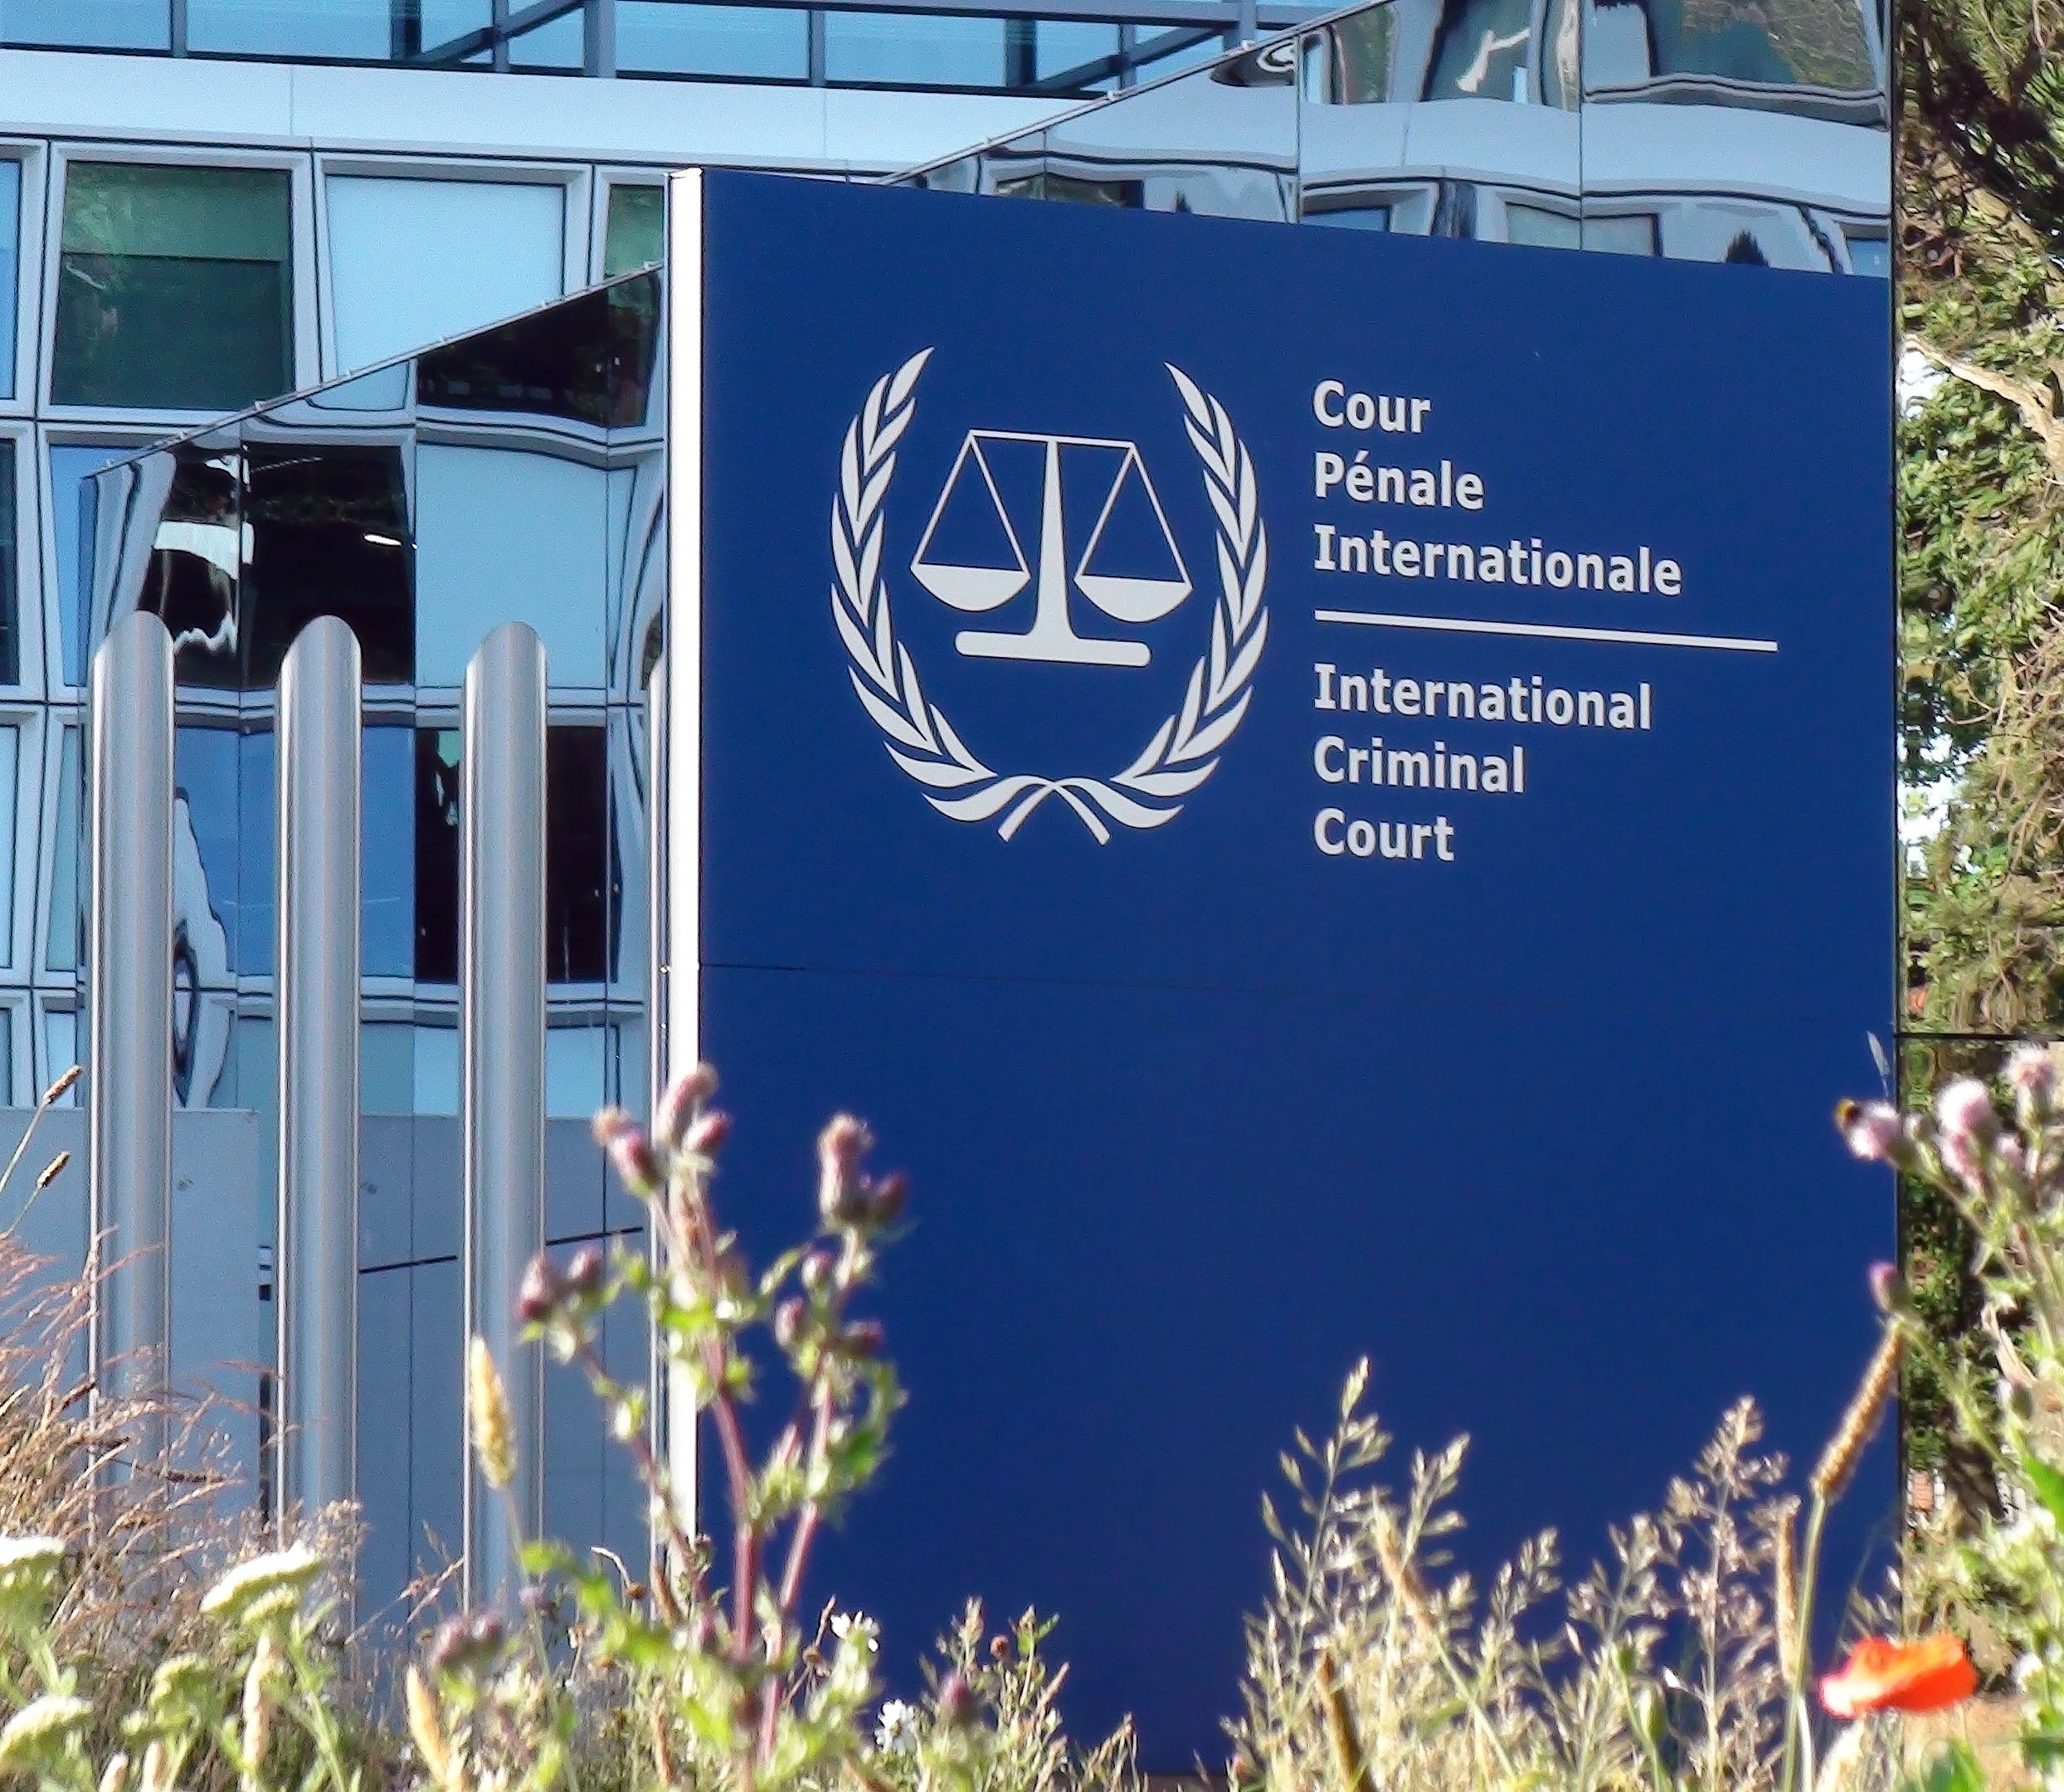 The International Criminal Court—A toothless tiger or a lion about to roar?